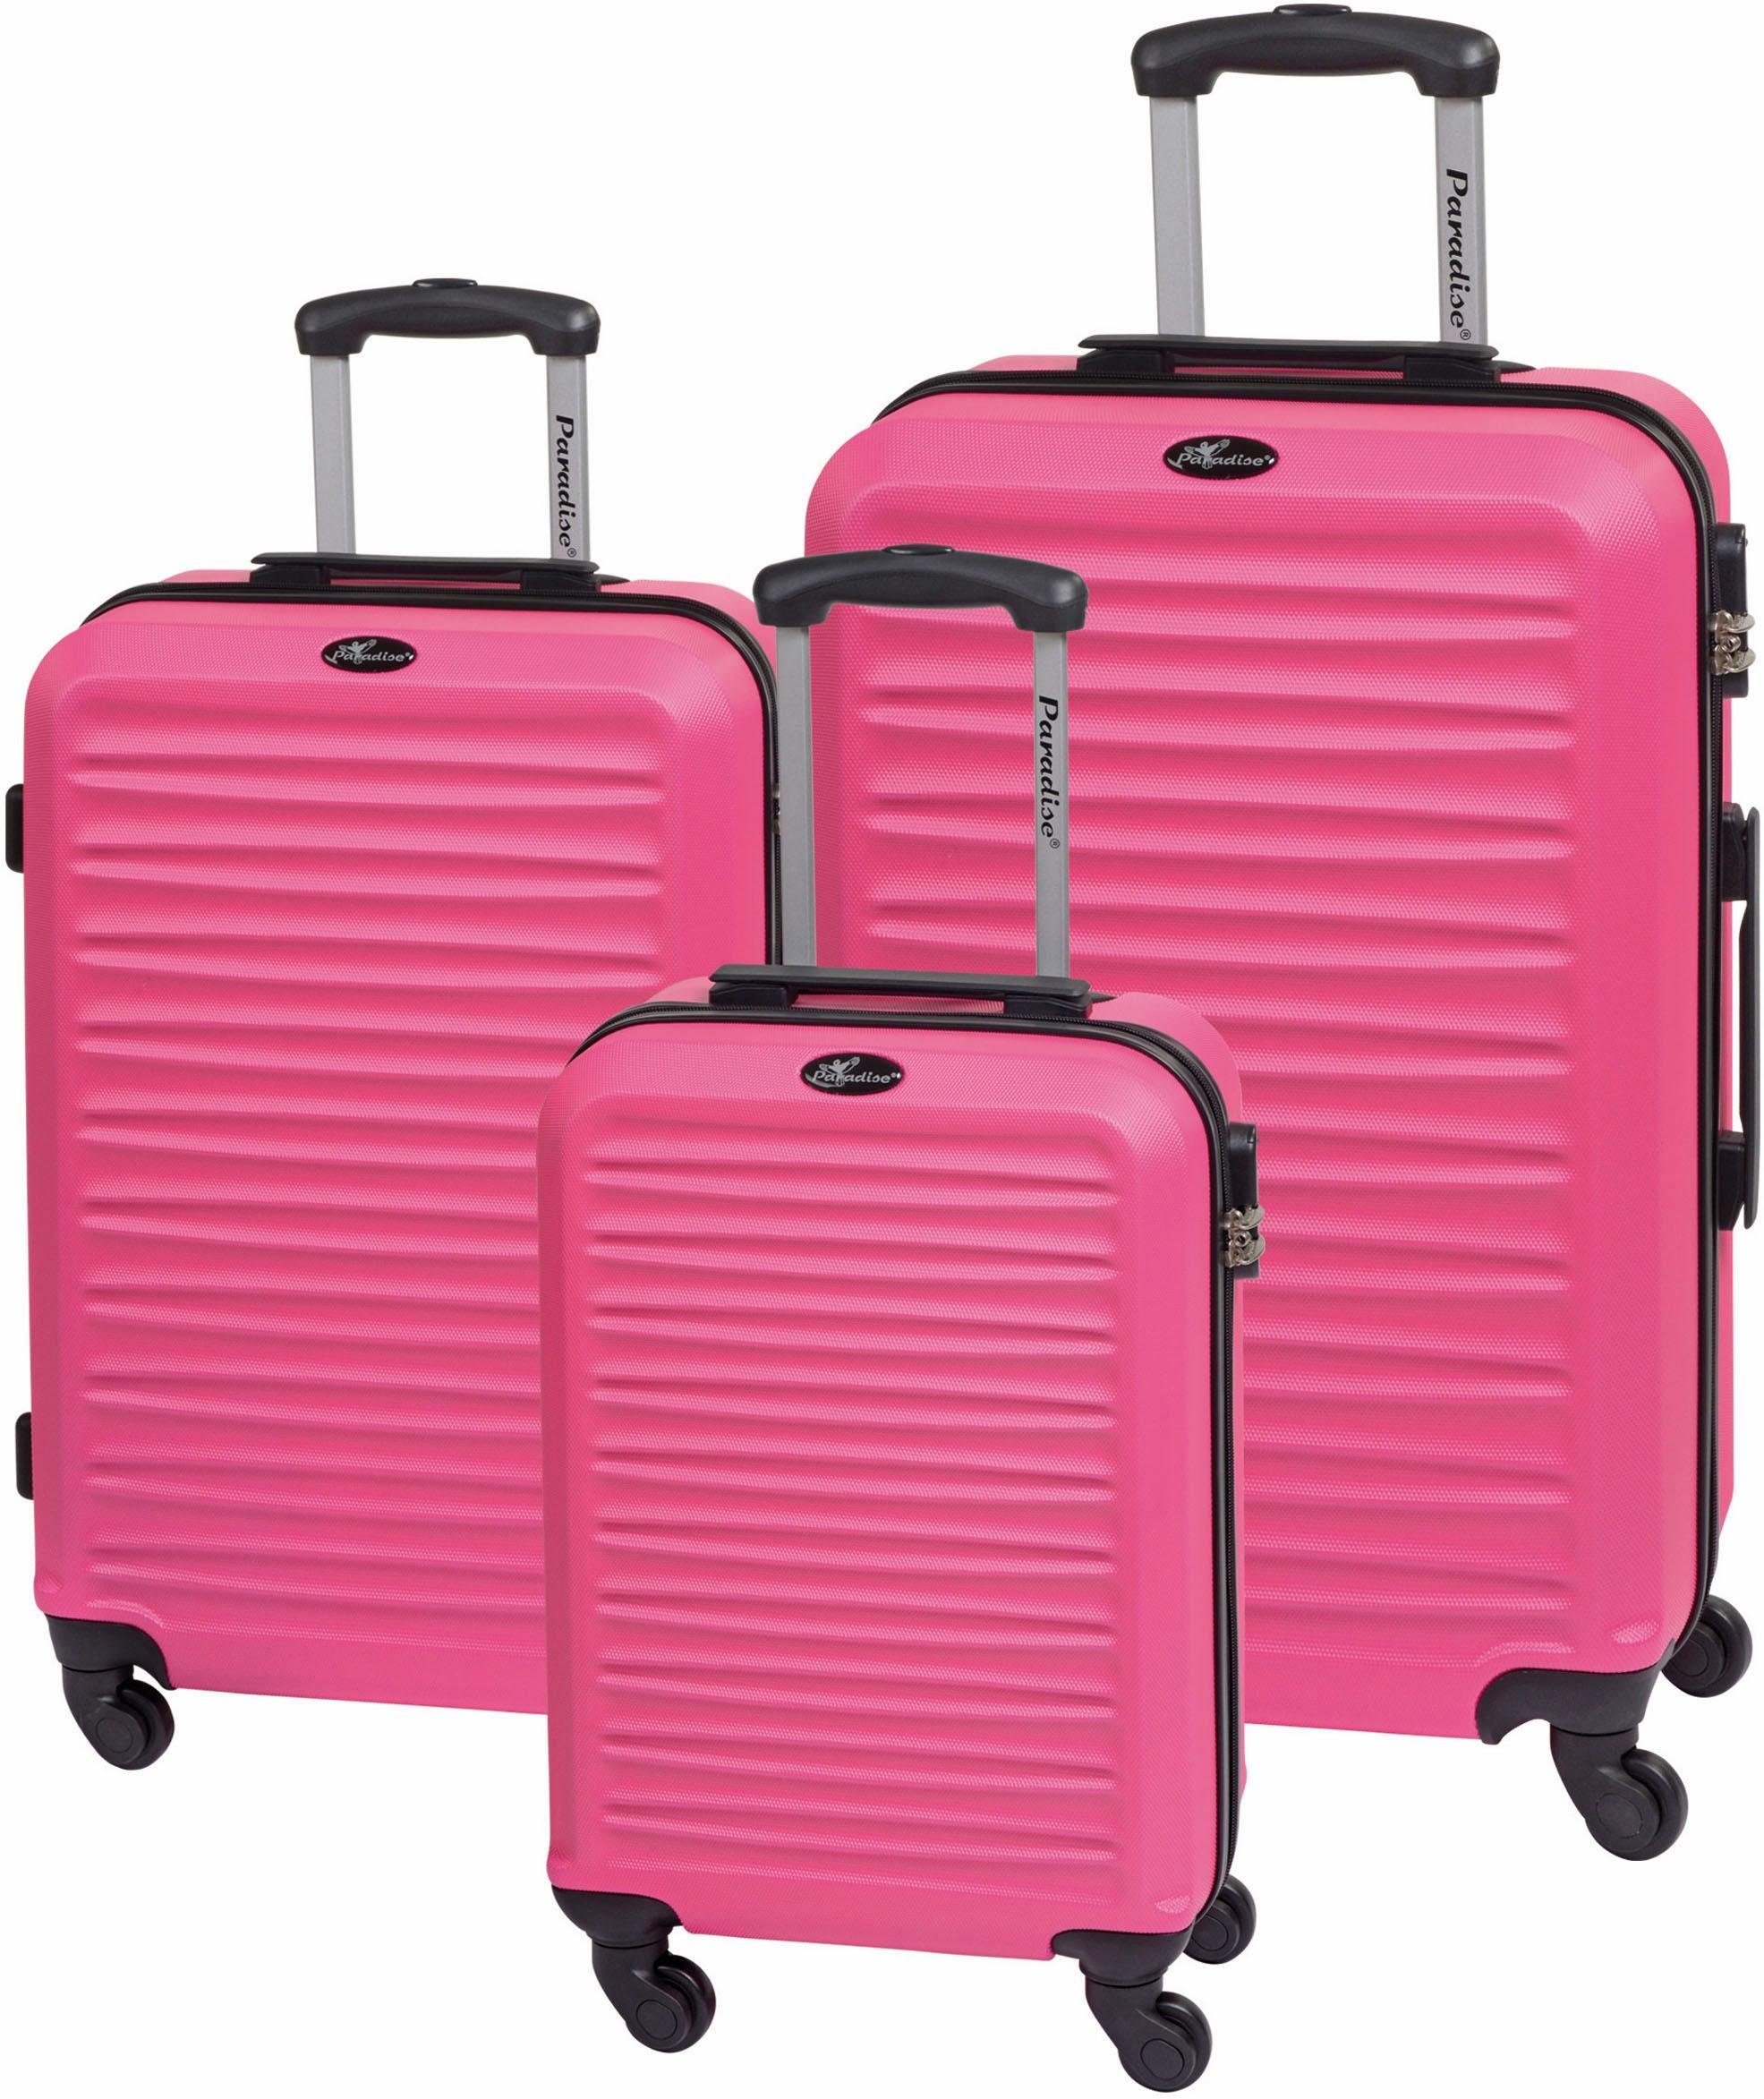 Paradise by CHECK.IN Trolleyset Havanna, 4 Rollen, (Set, 3 tlg) pink